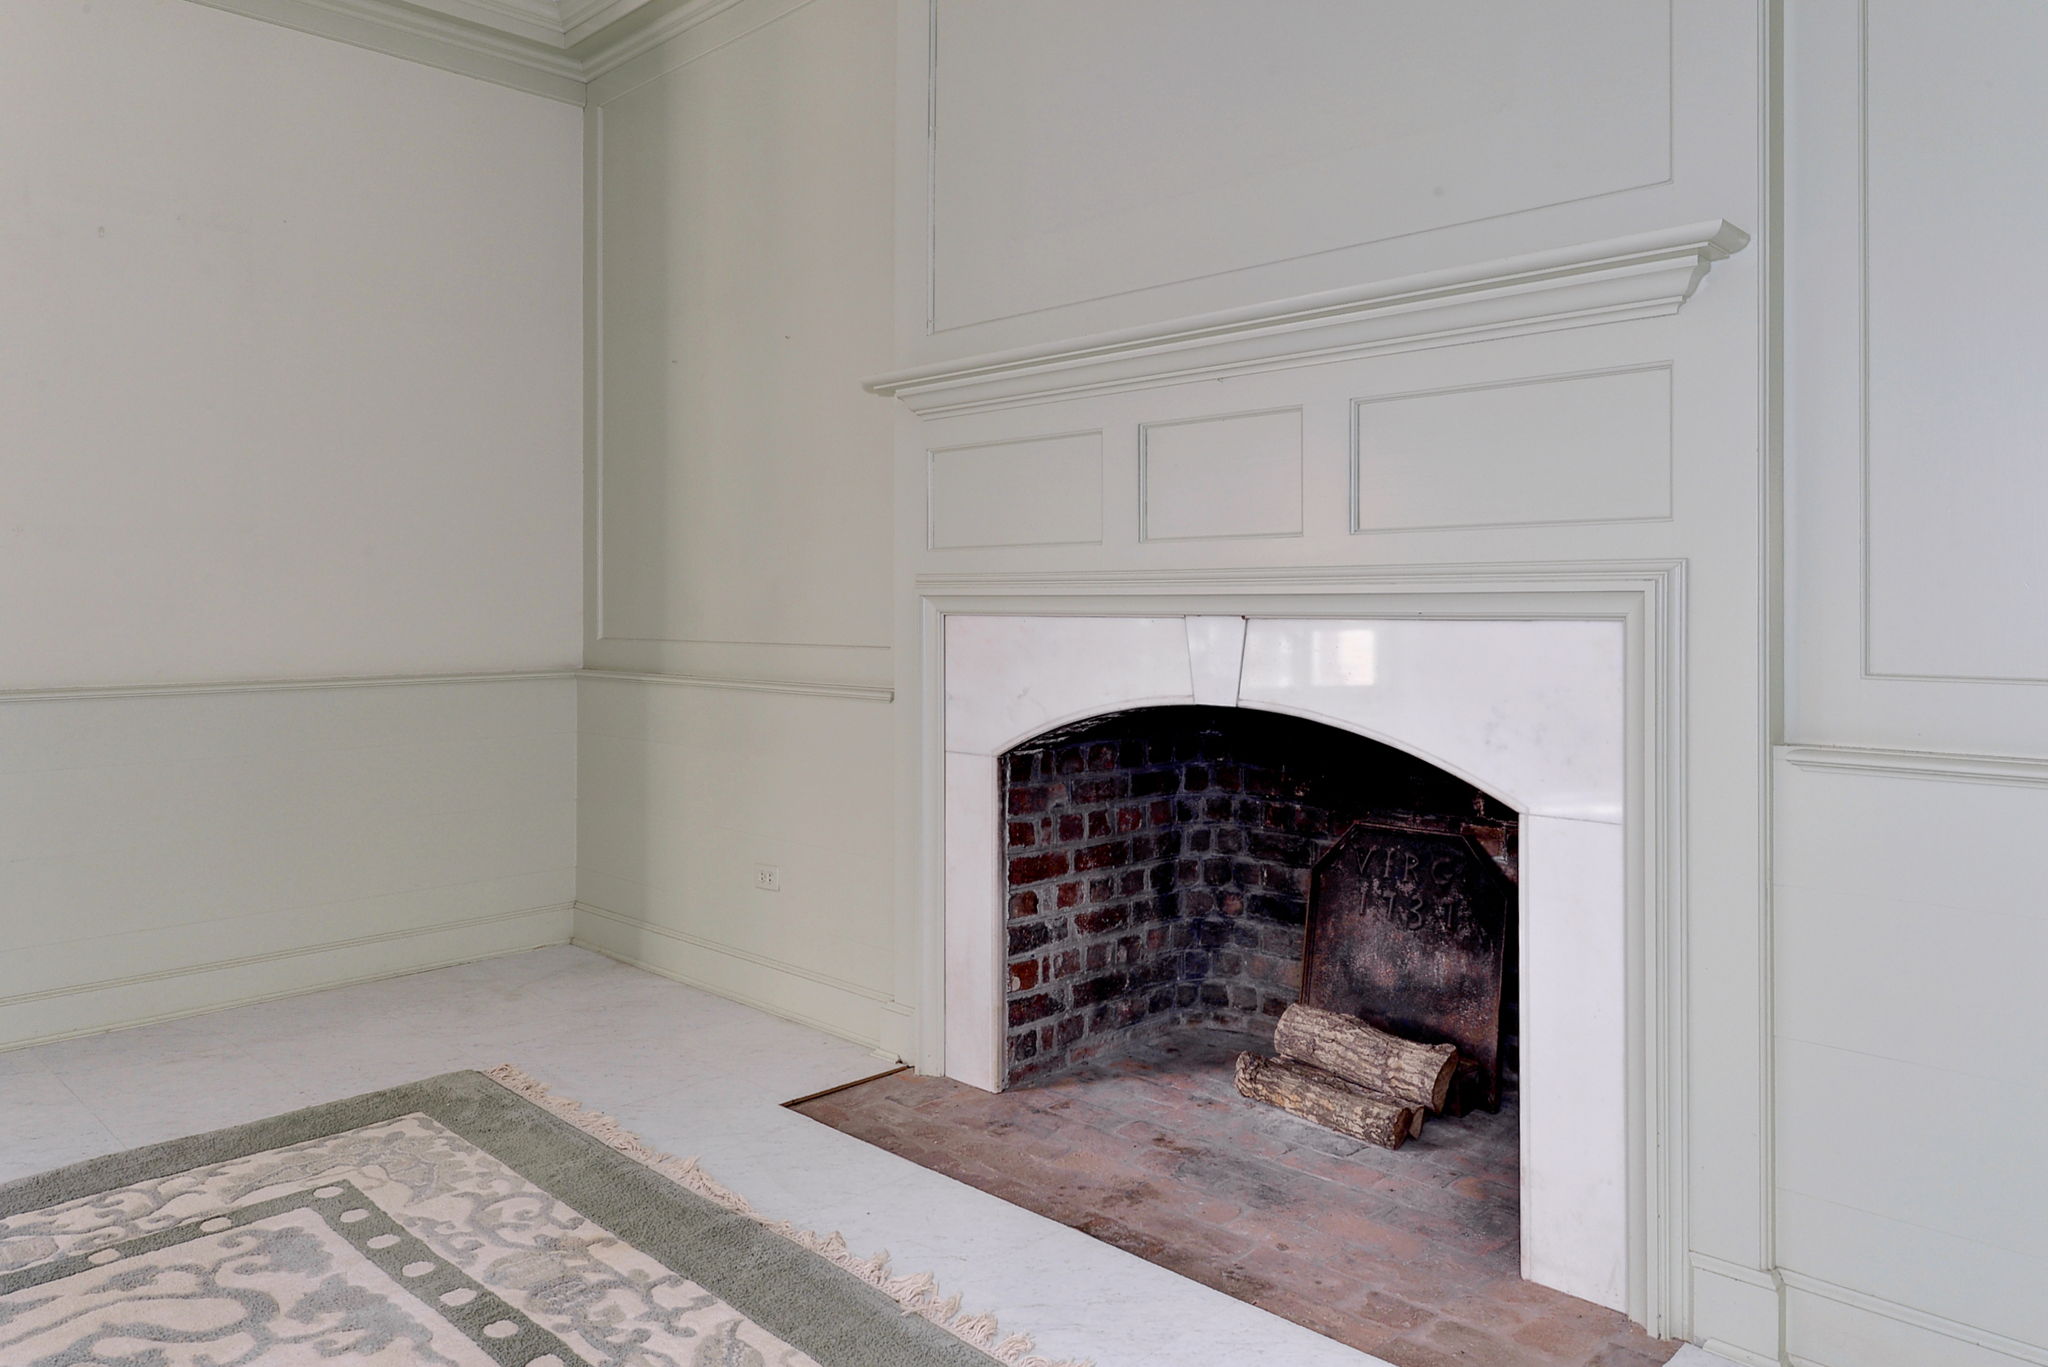 Living Room - Arched Marble Fireplace